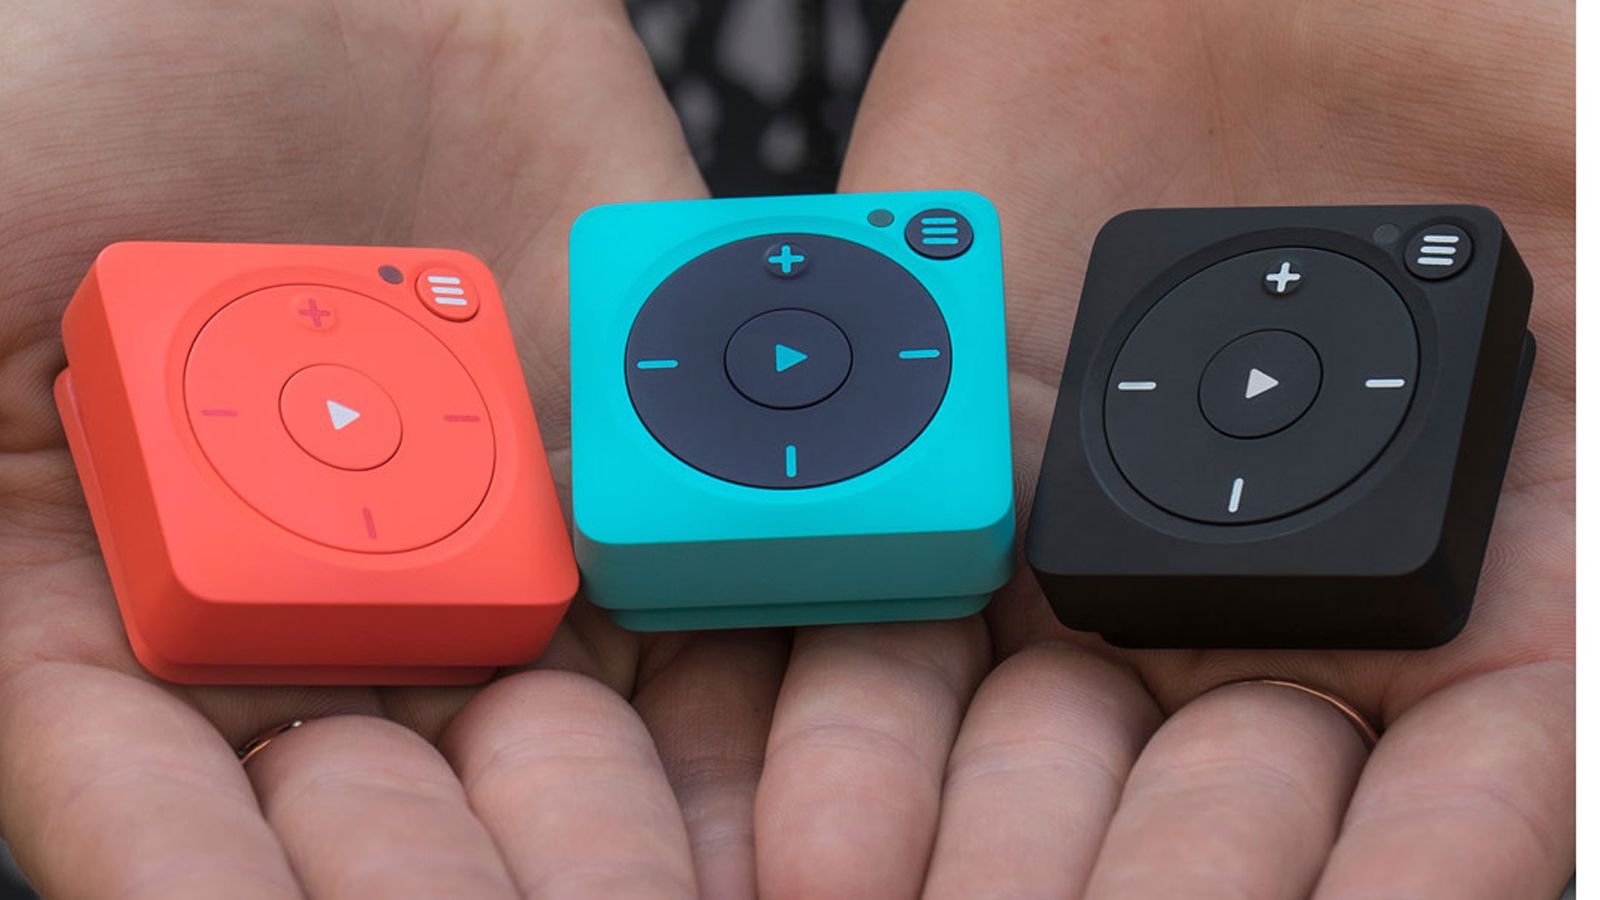 Someone's hands cupped and holding three Mighty Vibe players in red, blue, and black.